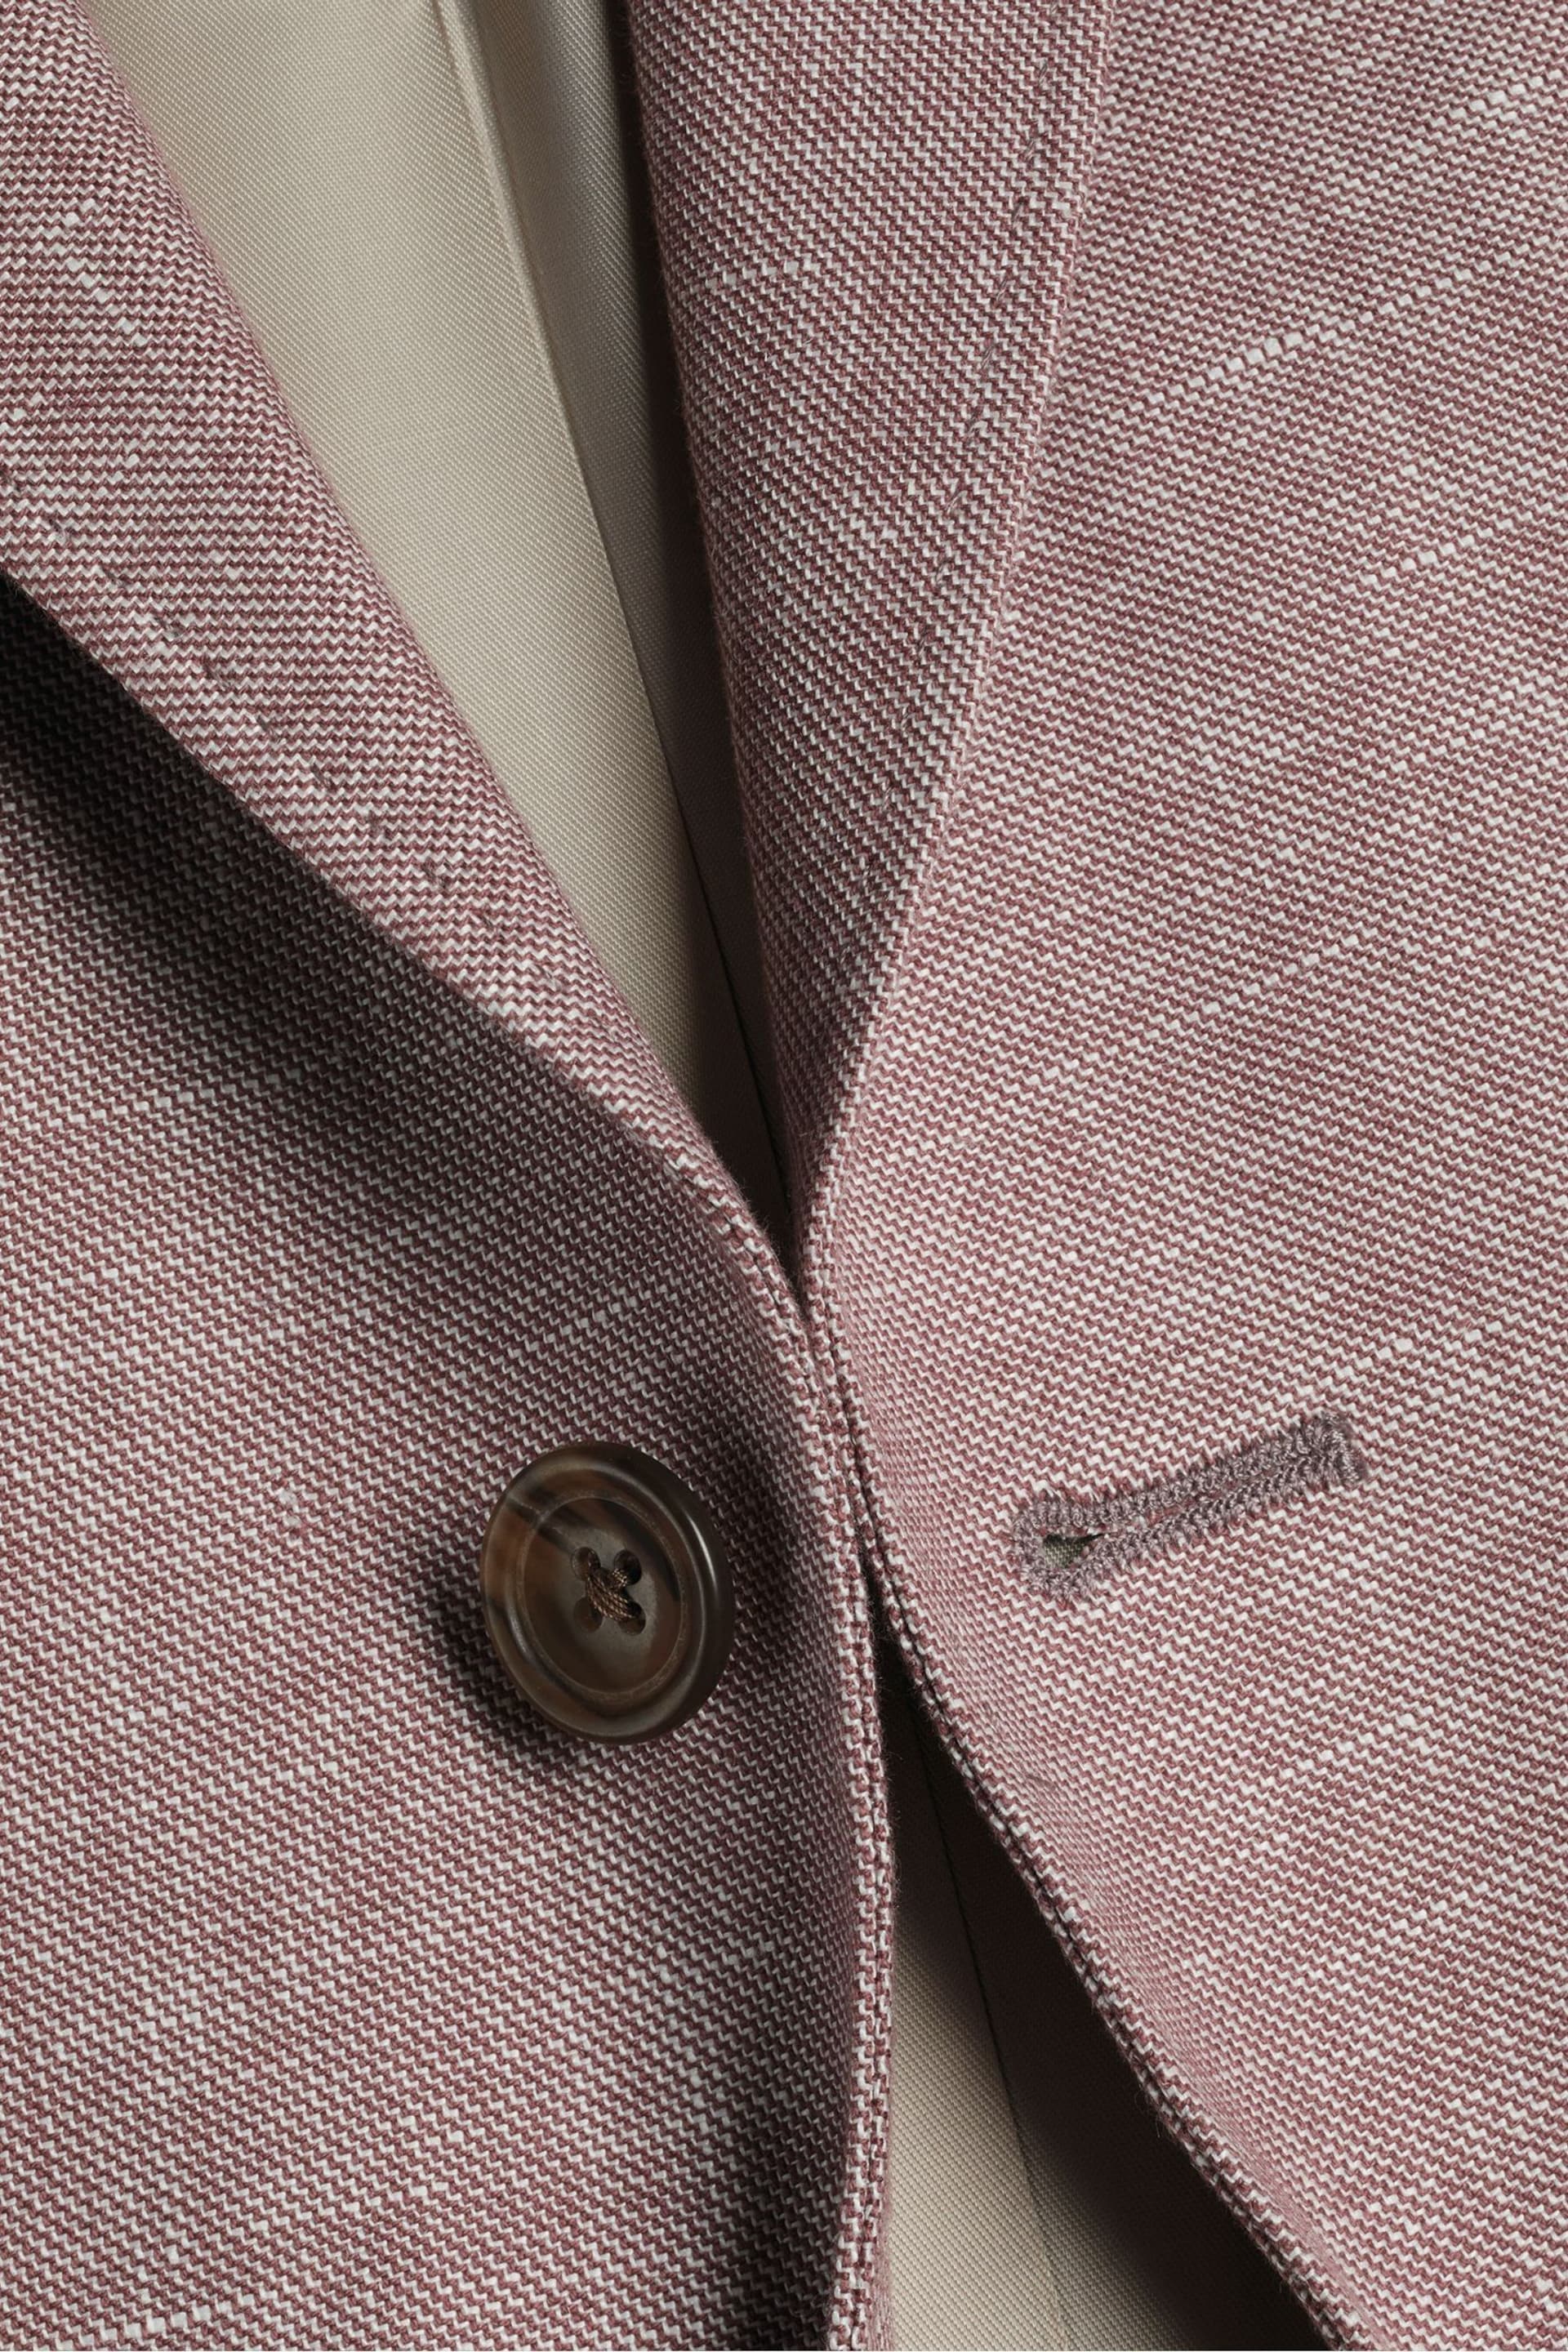 Charles Tyrwhitt Pink Slim Fit Updated Linen Cotton Jacket - Image 4 of 4